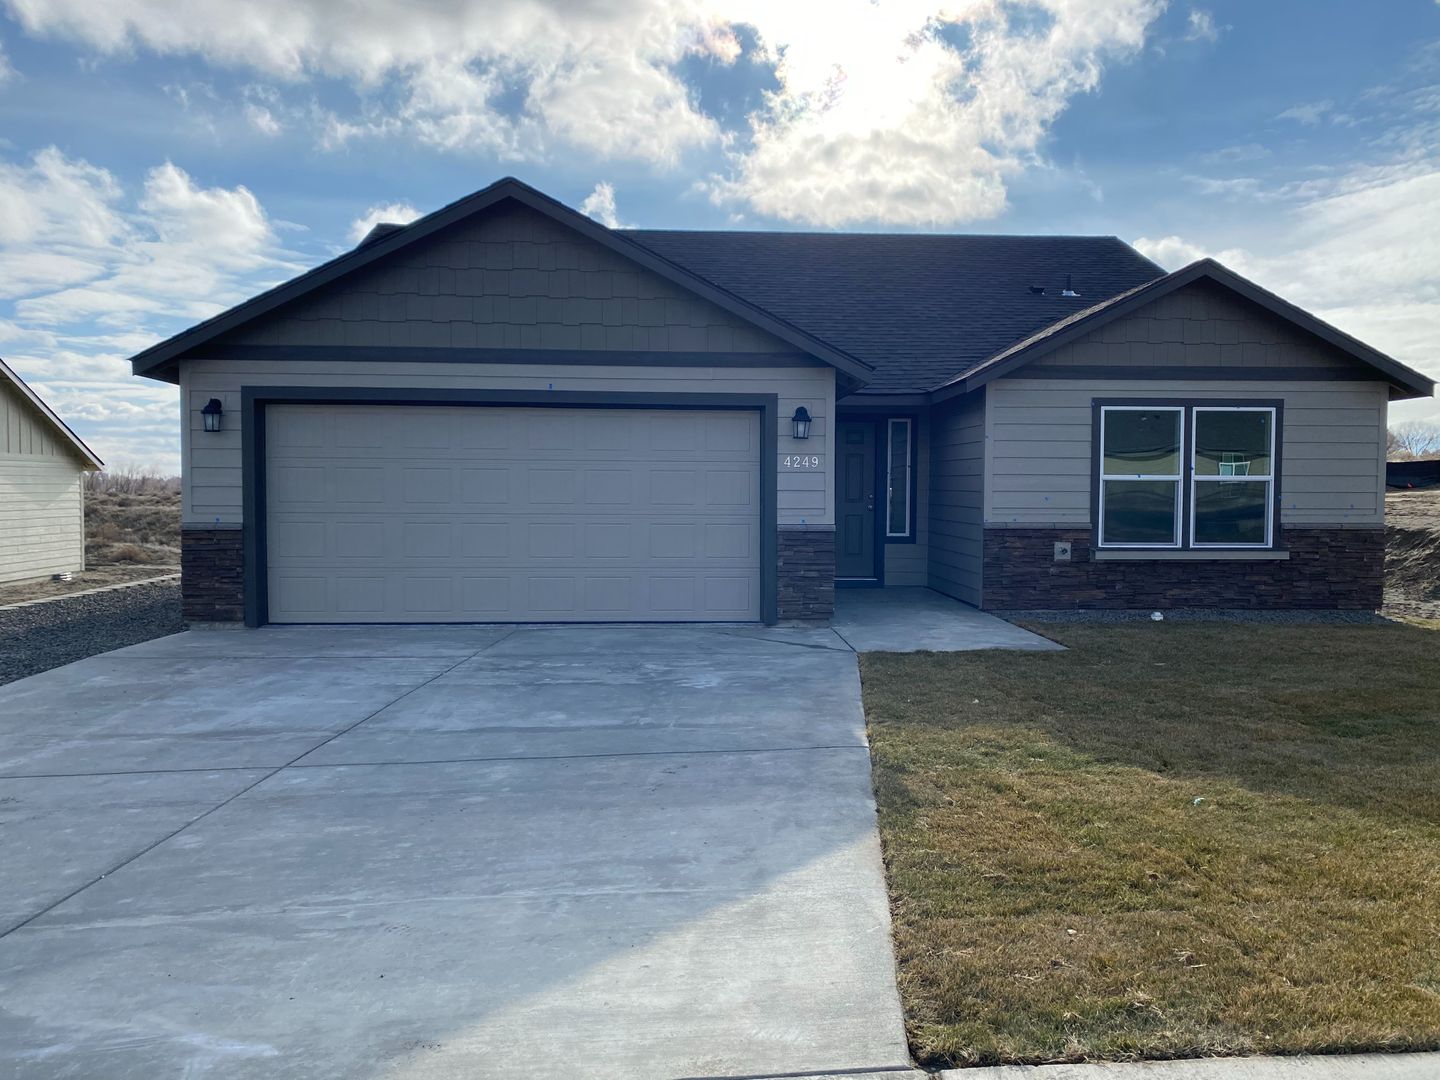 Brand new Edgewood Home in Sagecrest Development! Available Now!